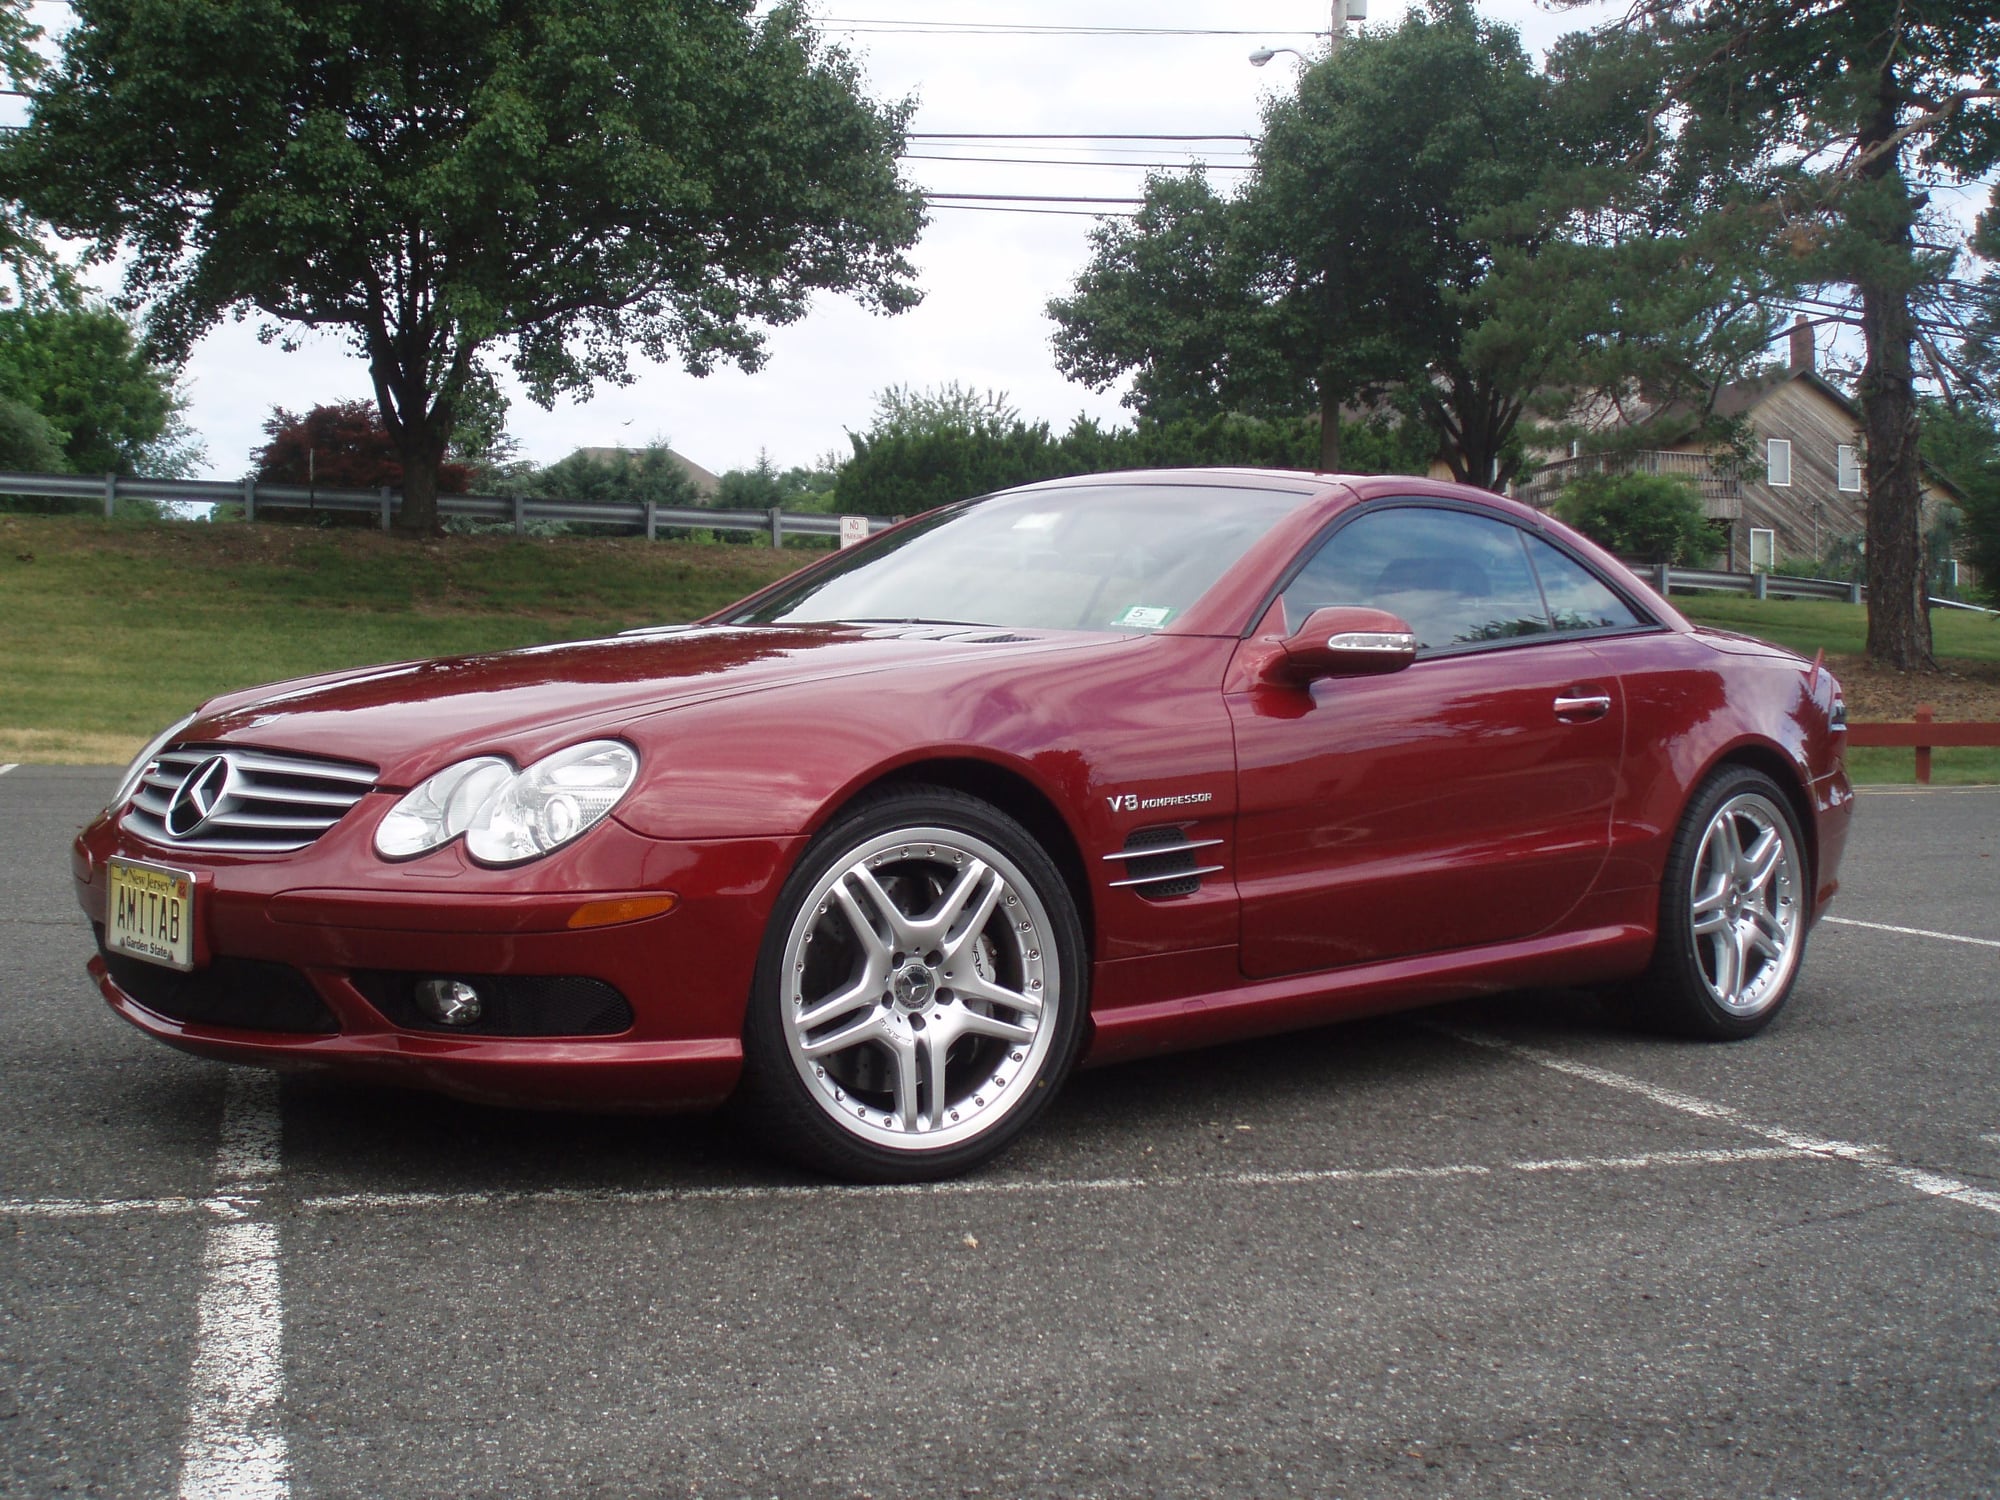 2003 Mercedes-Benz SL55 AMG - FS:  2003 SL55 Firemist Red/Black Single owner, clean car fax - Used - VIN WDBSK74F23F032815 - 37,300 Miles - 8 cyl - 2WD - Automatic - Convertible - Red - Montvale, NJ 07645, United States